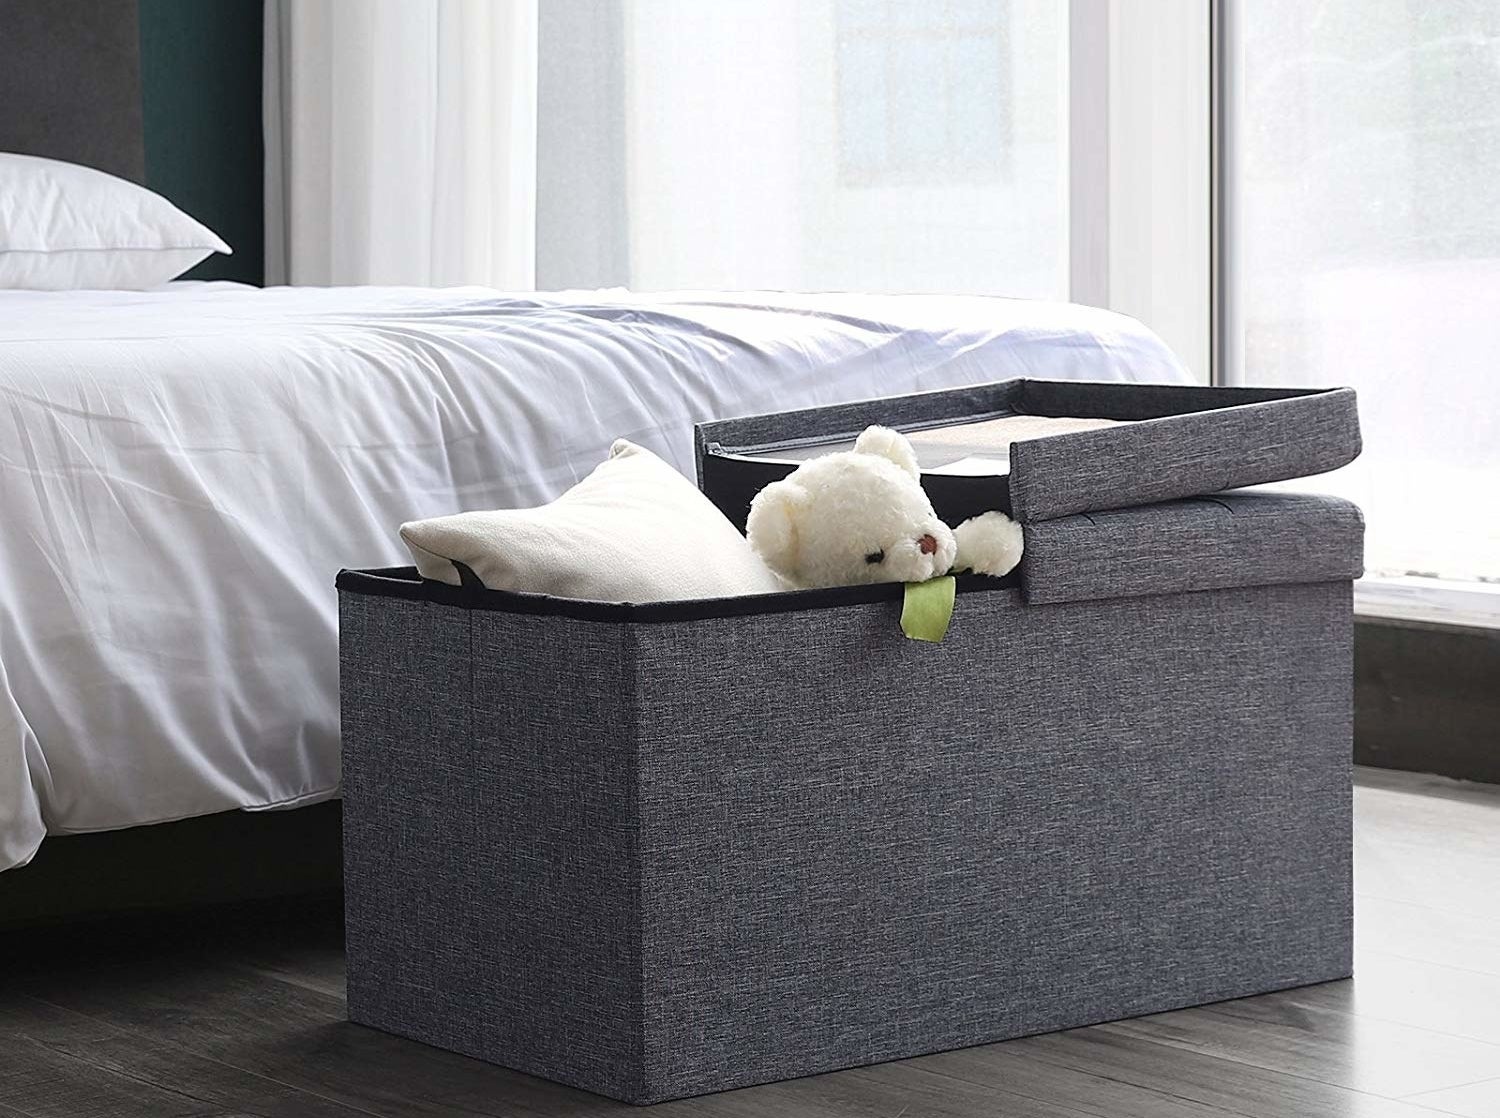 The storage bench at the foot of a bed